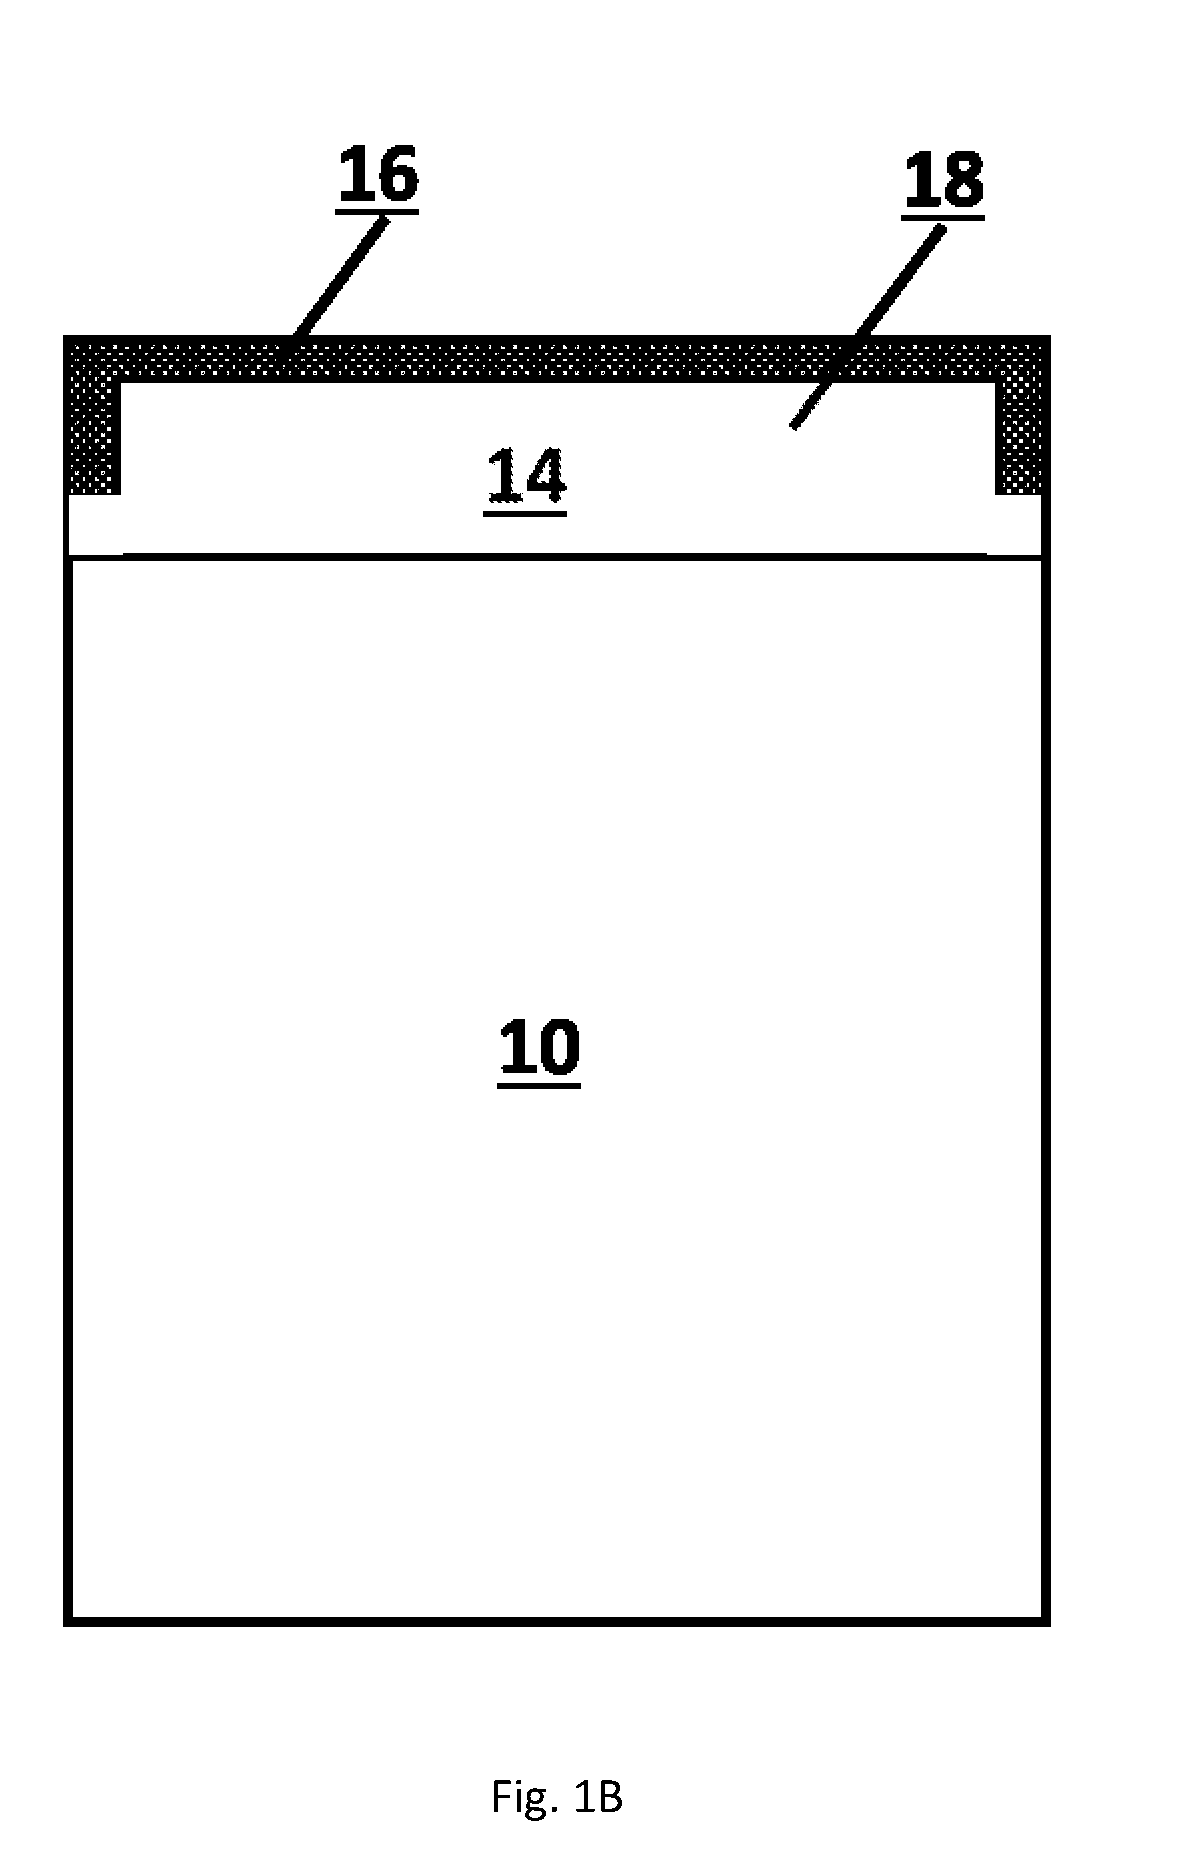 Polycrystalline Diamond Compact Cutters Having Protective Barrier Coatings